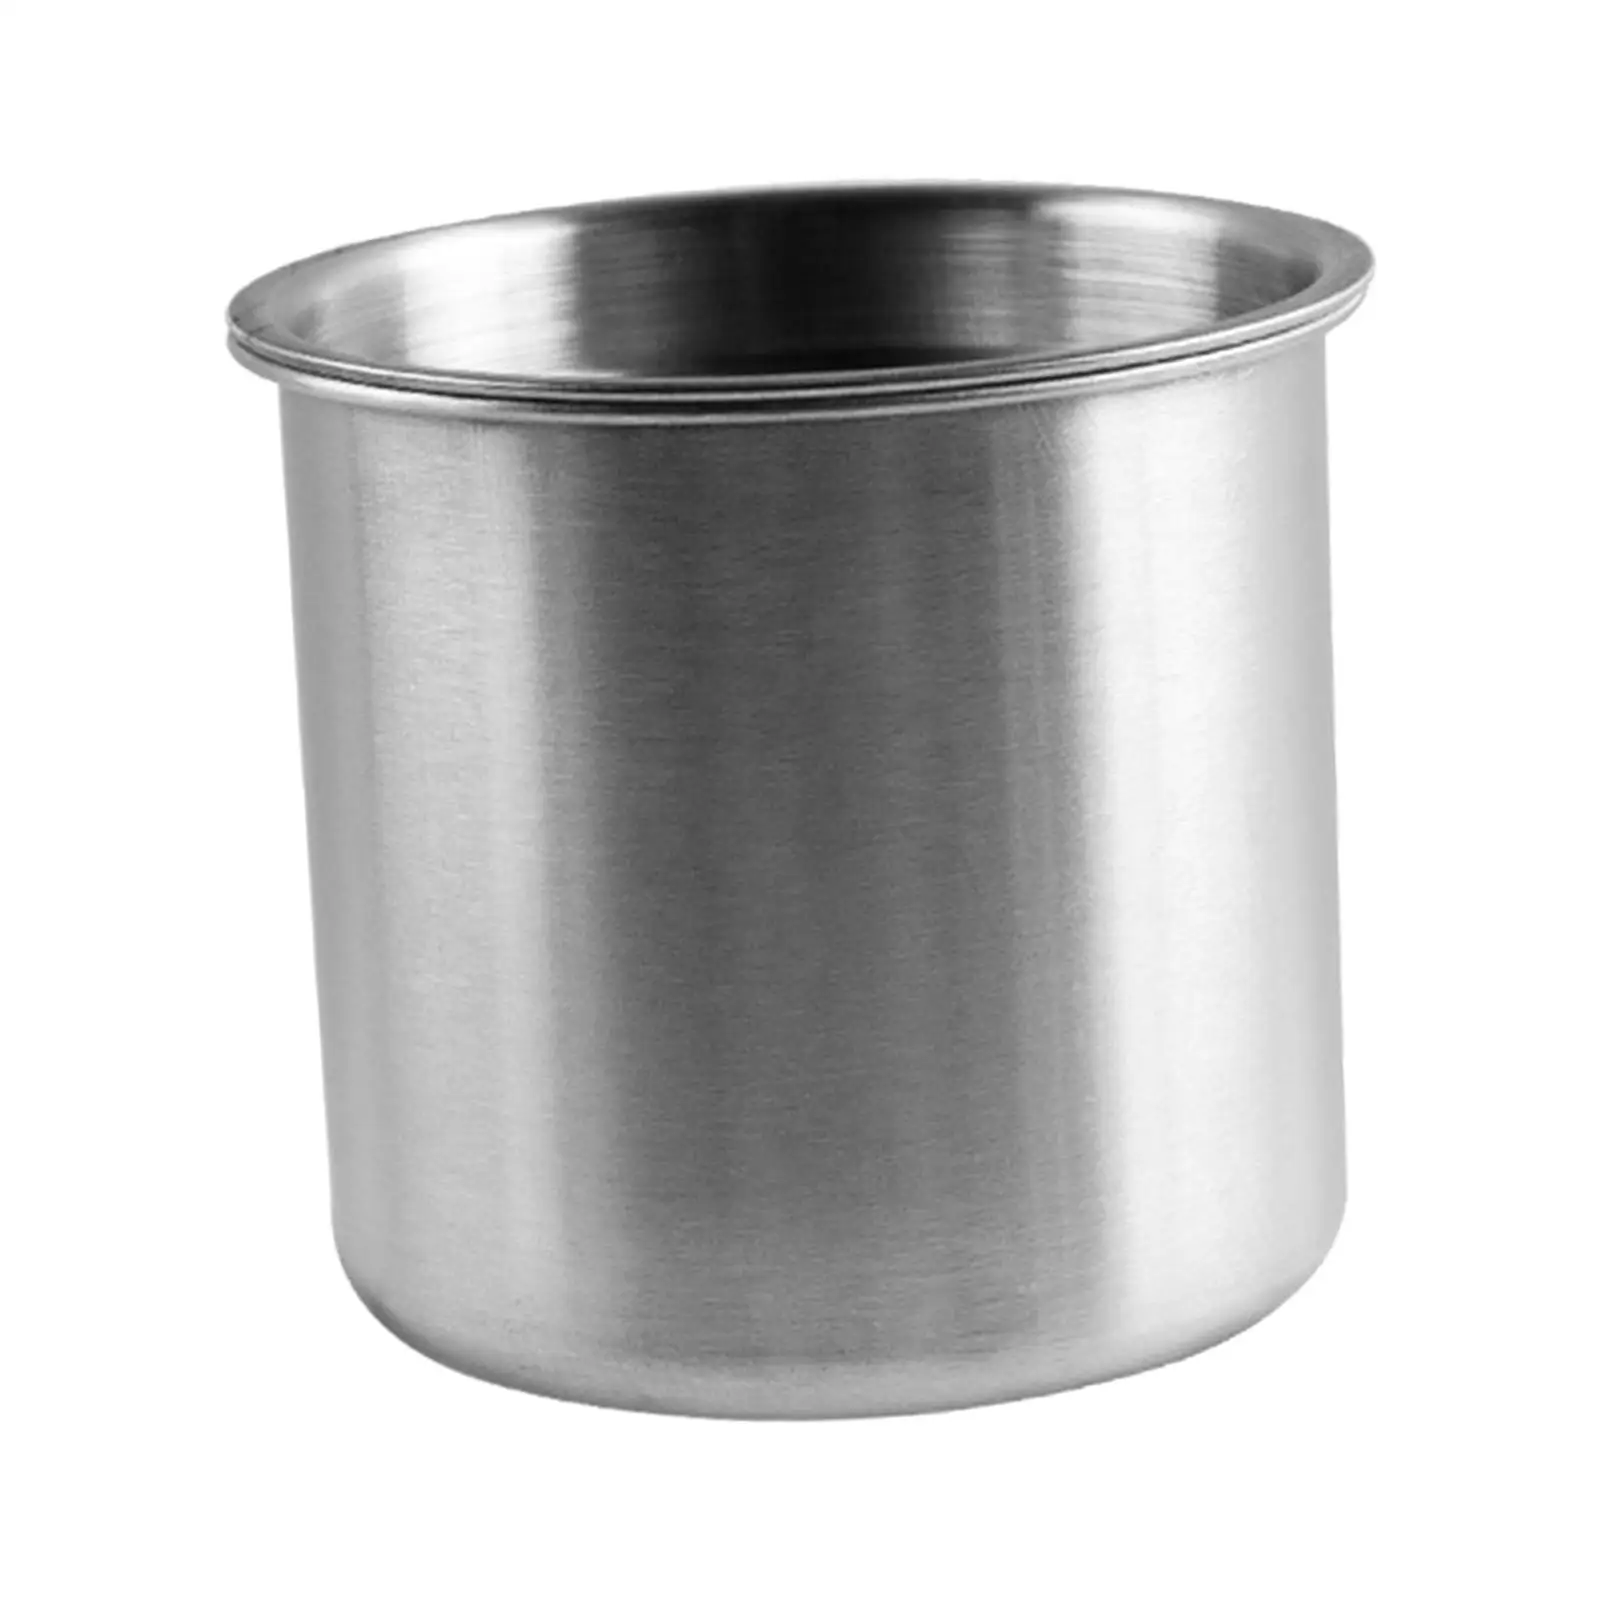 Large Ashtray Stainless Steel Funnel Design Cigarette Ashtray Cigarette Butt Container for Smokers Outside Patio Garden Office